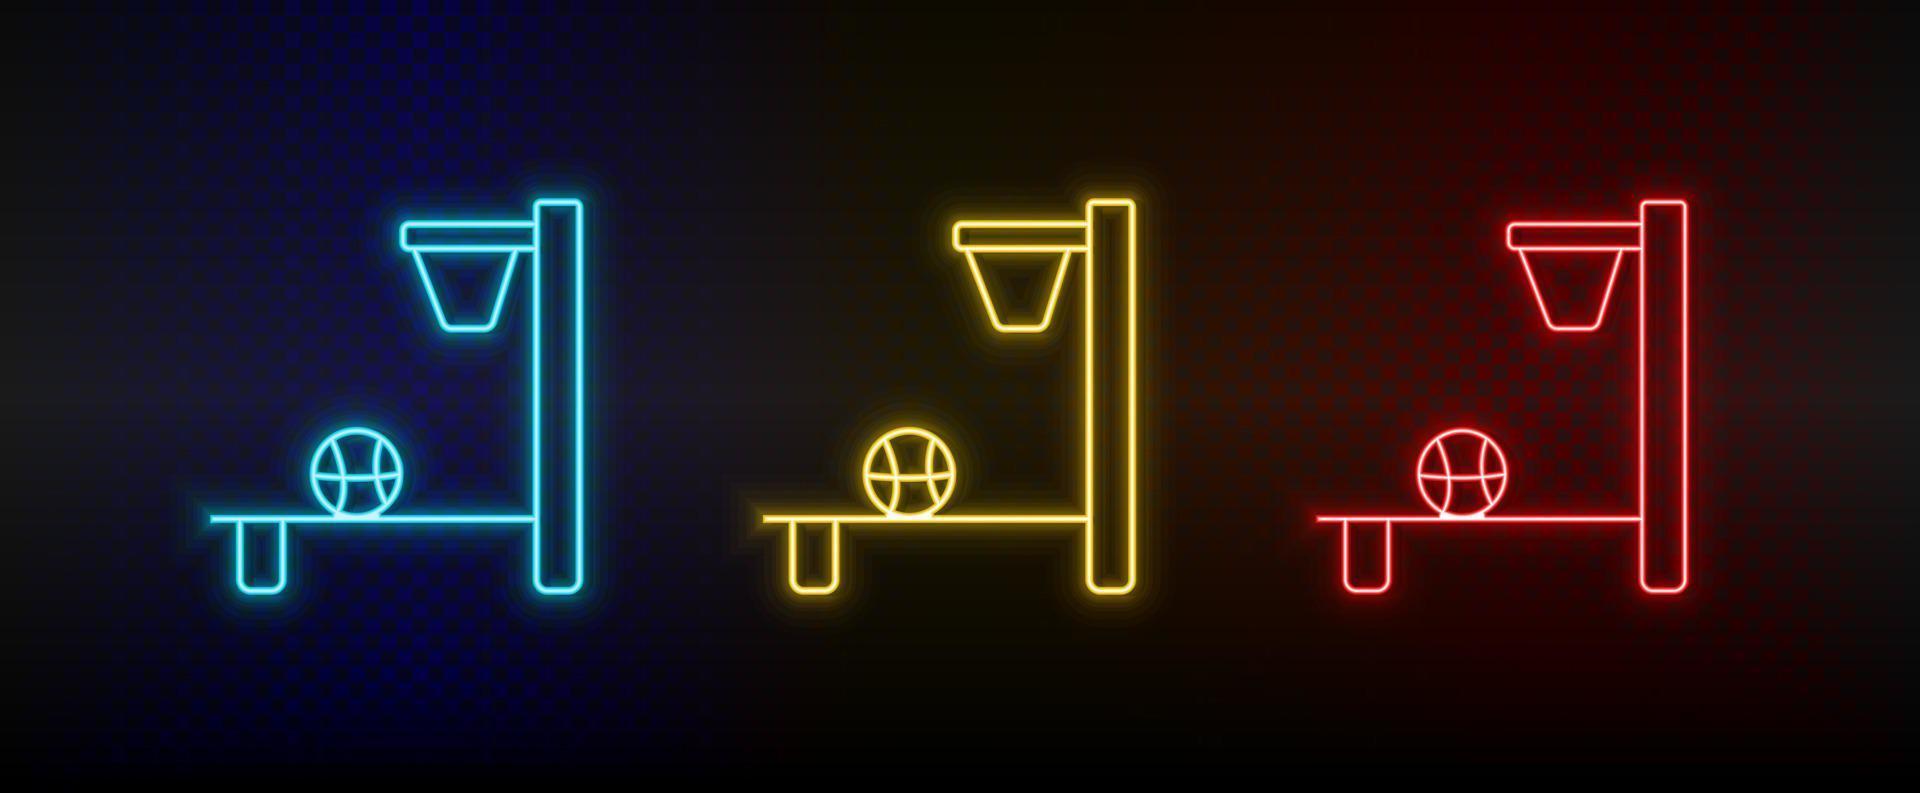 Neon icons. Basketball arcade electronic. Set of red, blue, yellow neon vector icon on darken background